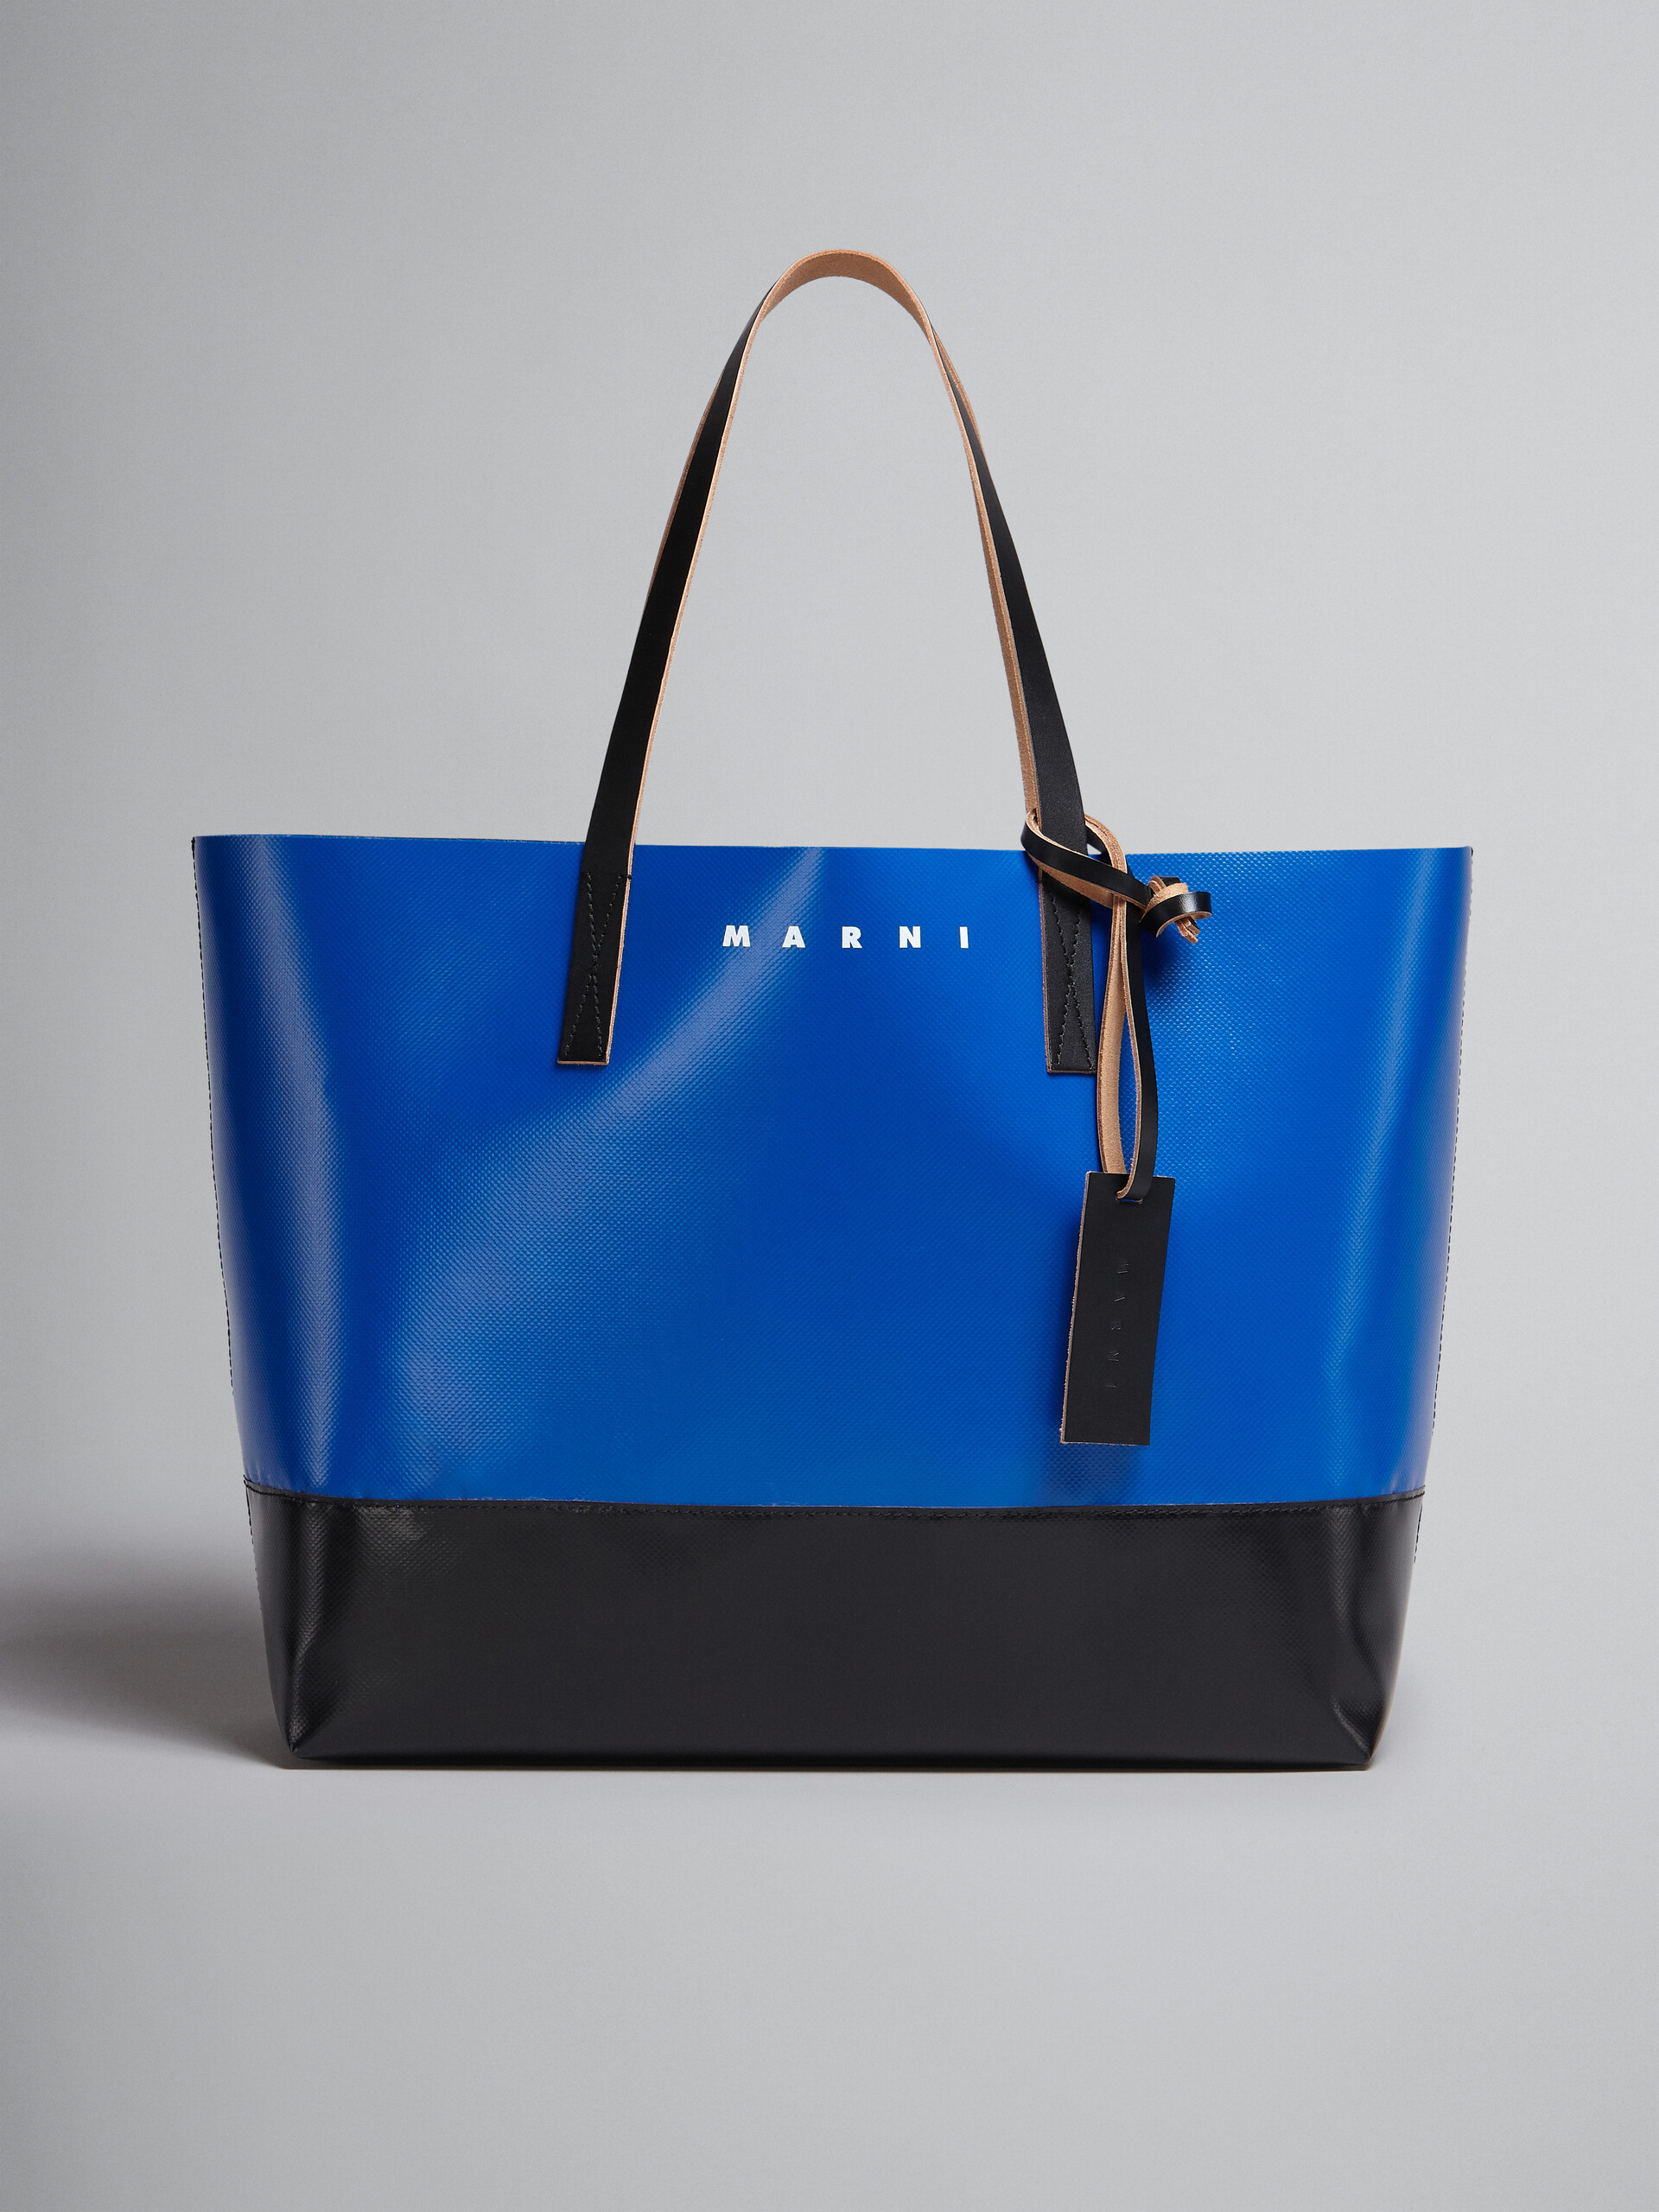 Tribeca shopping bag in blue and black - Shopping Bags - Image 1